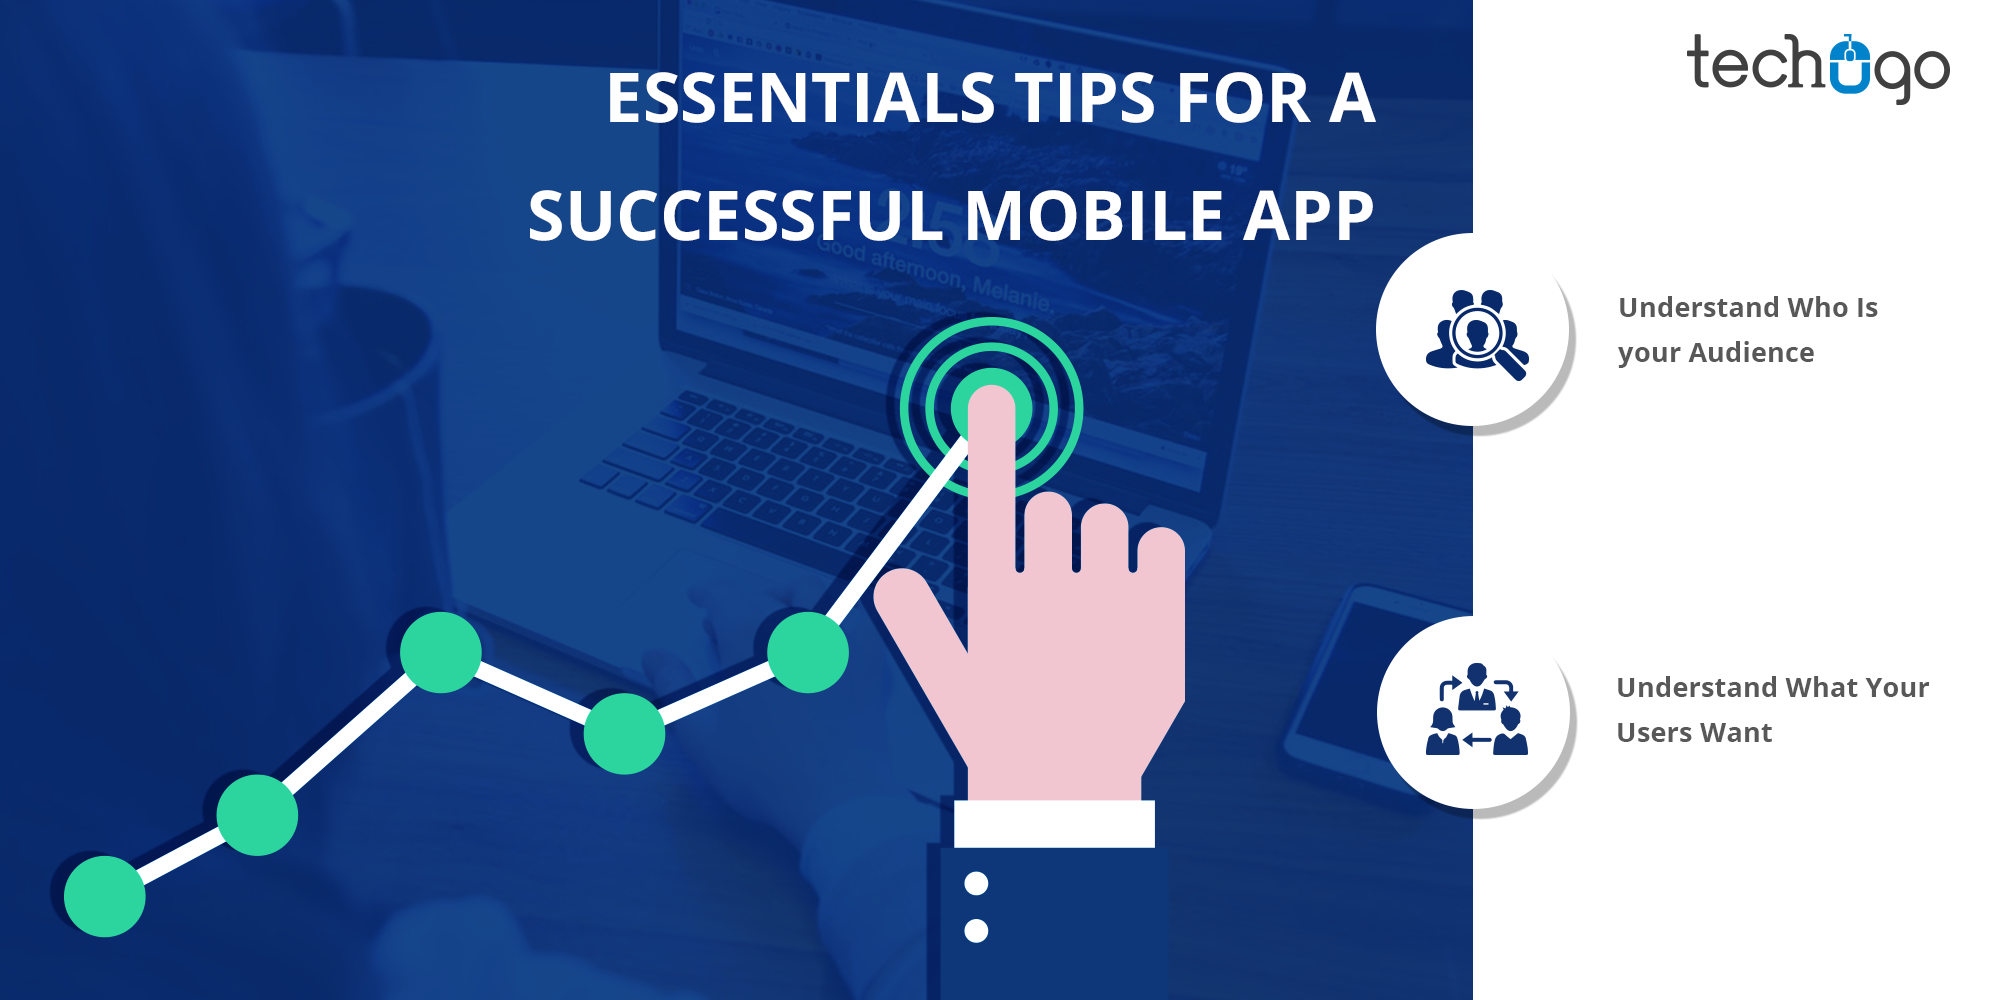 Essentials Tips For A Successful Mobile App